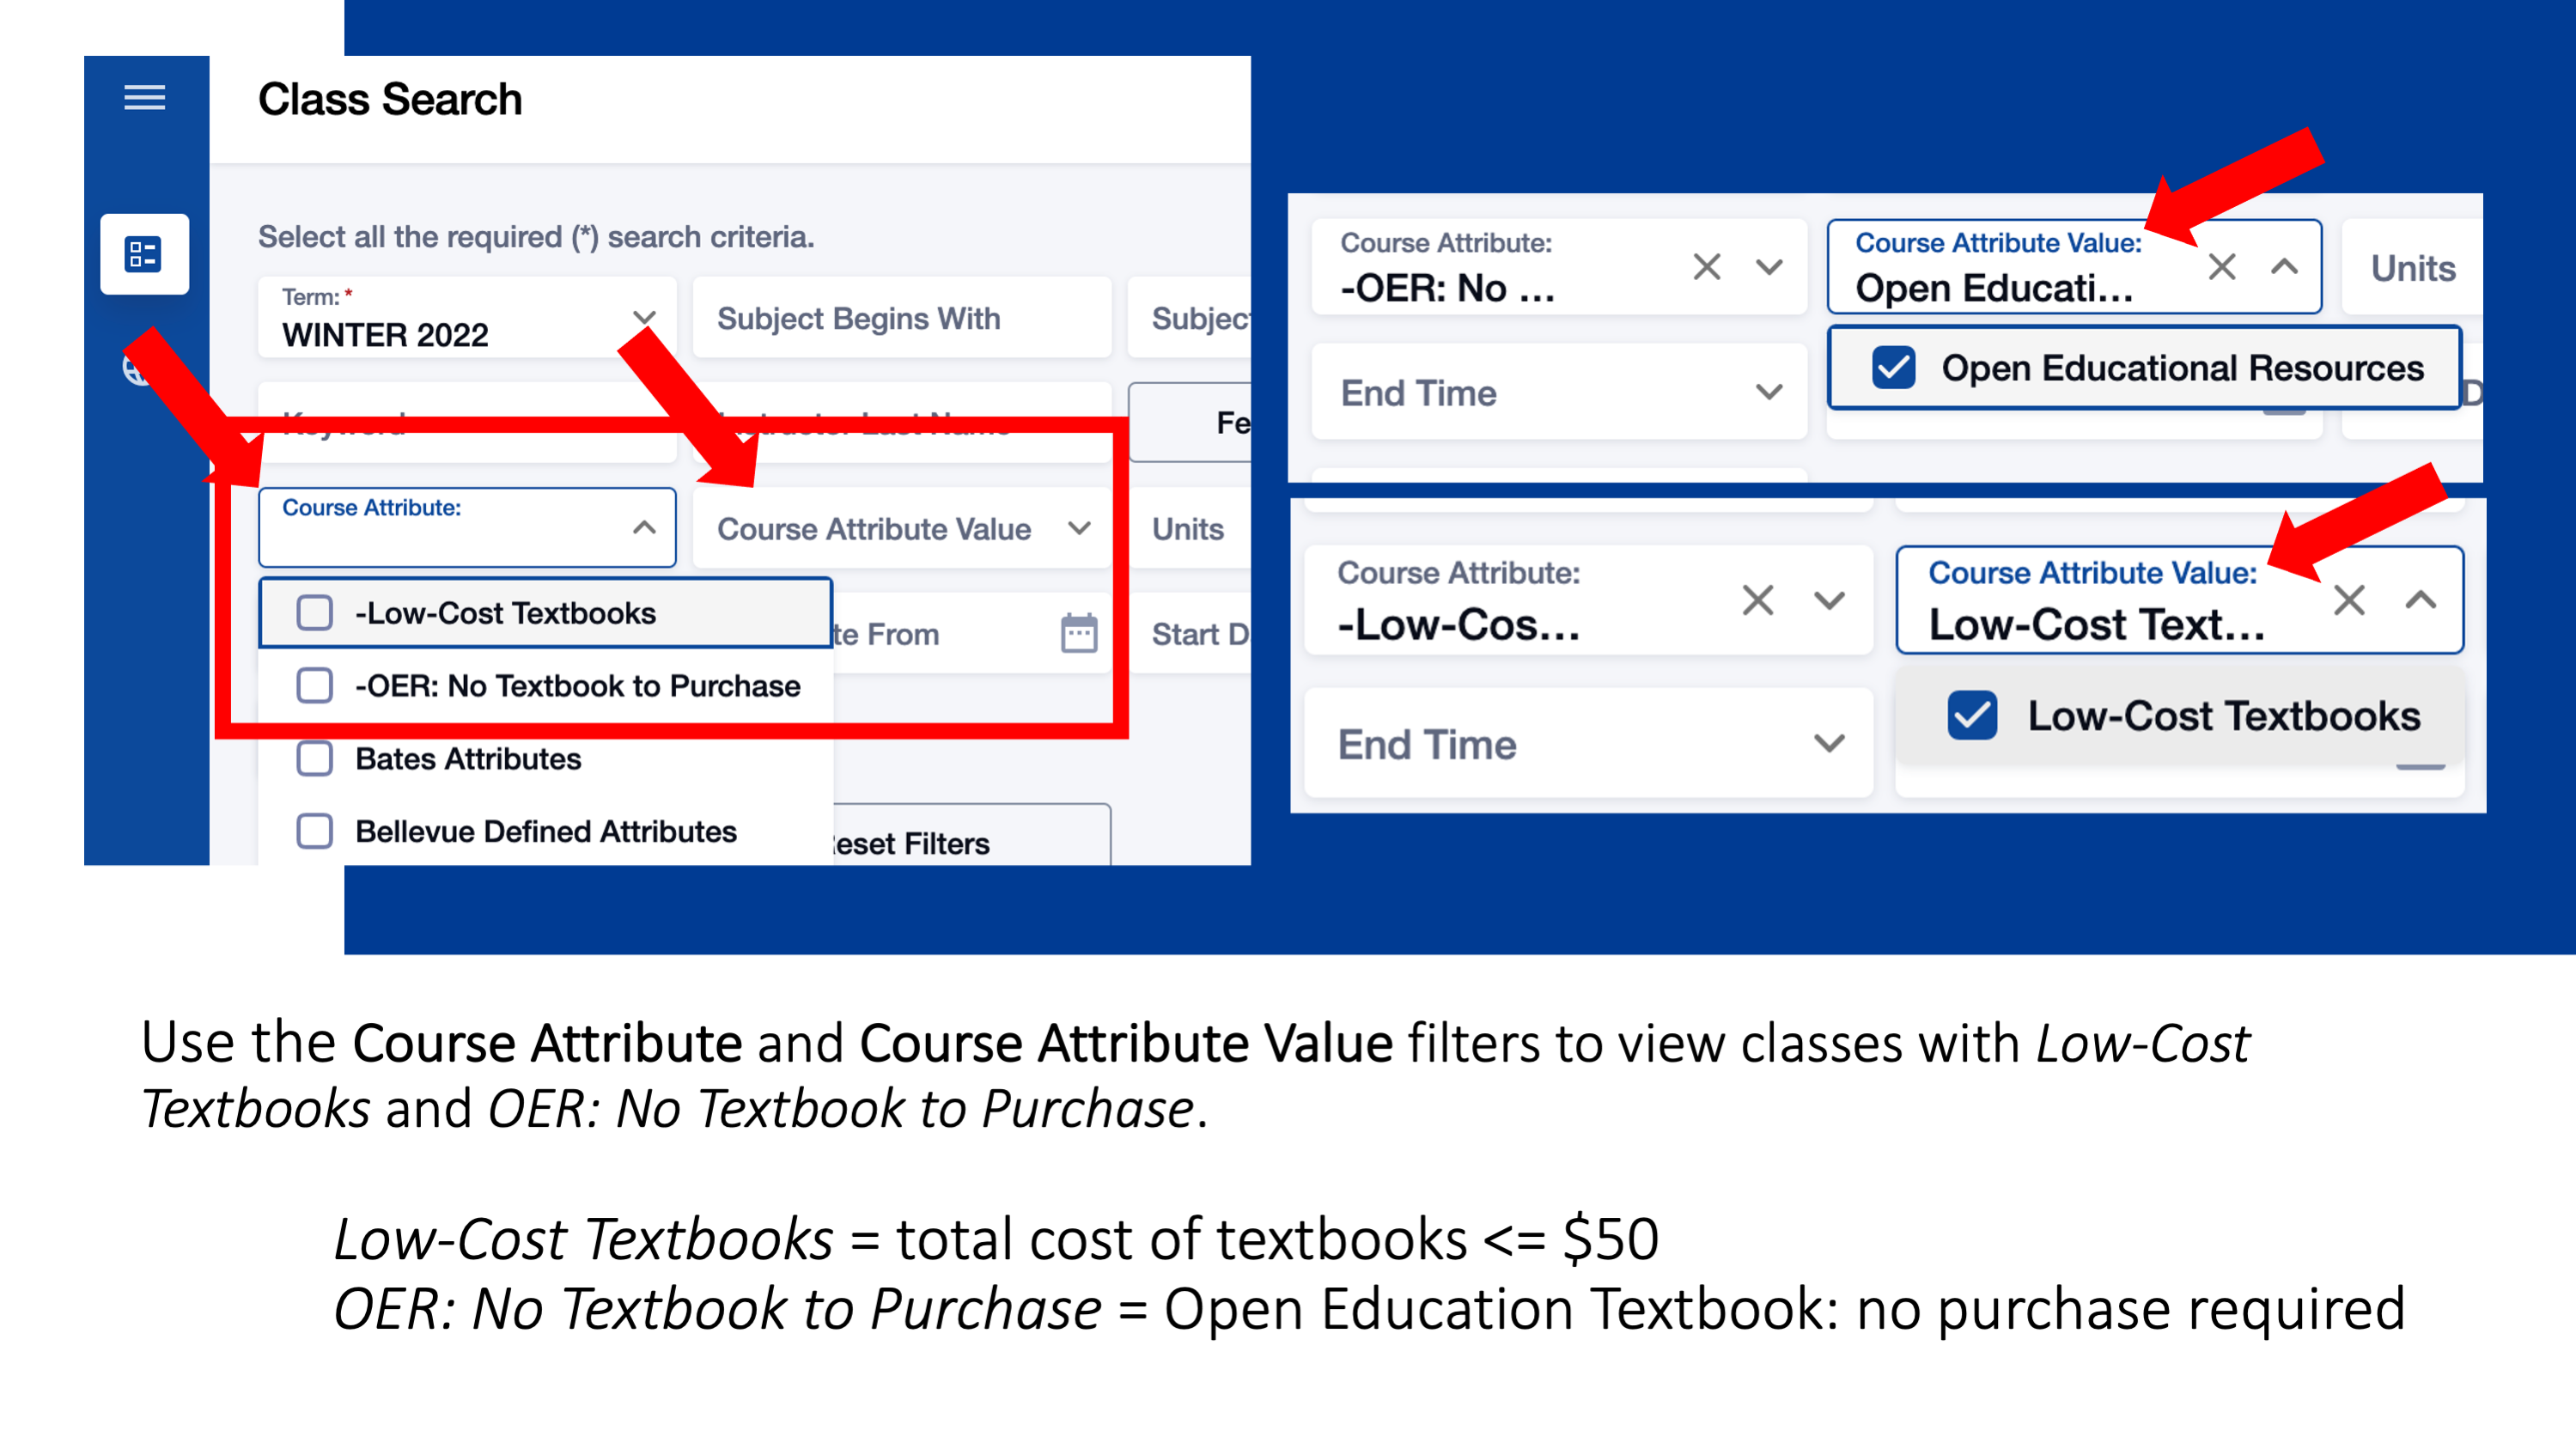 Use the Course Attribute and Course Attribute Value filters to view classes with Low-Cost Textbooks and OER: No Textbook to Purchase. Low-Cost Textbooks = total cost of textbooks <= $50; OER: No Textbook to Purchase = Open Education Textbook: no purchase required. 